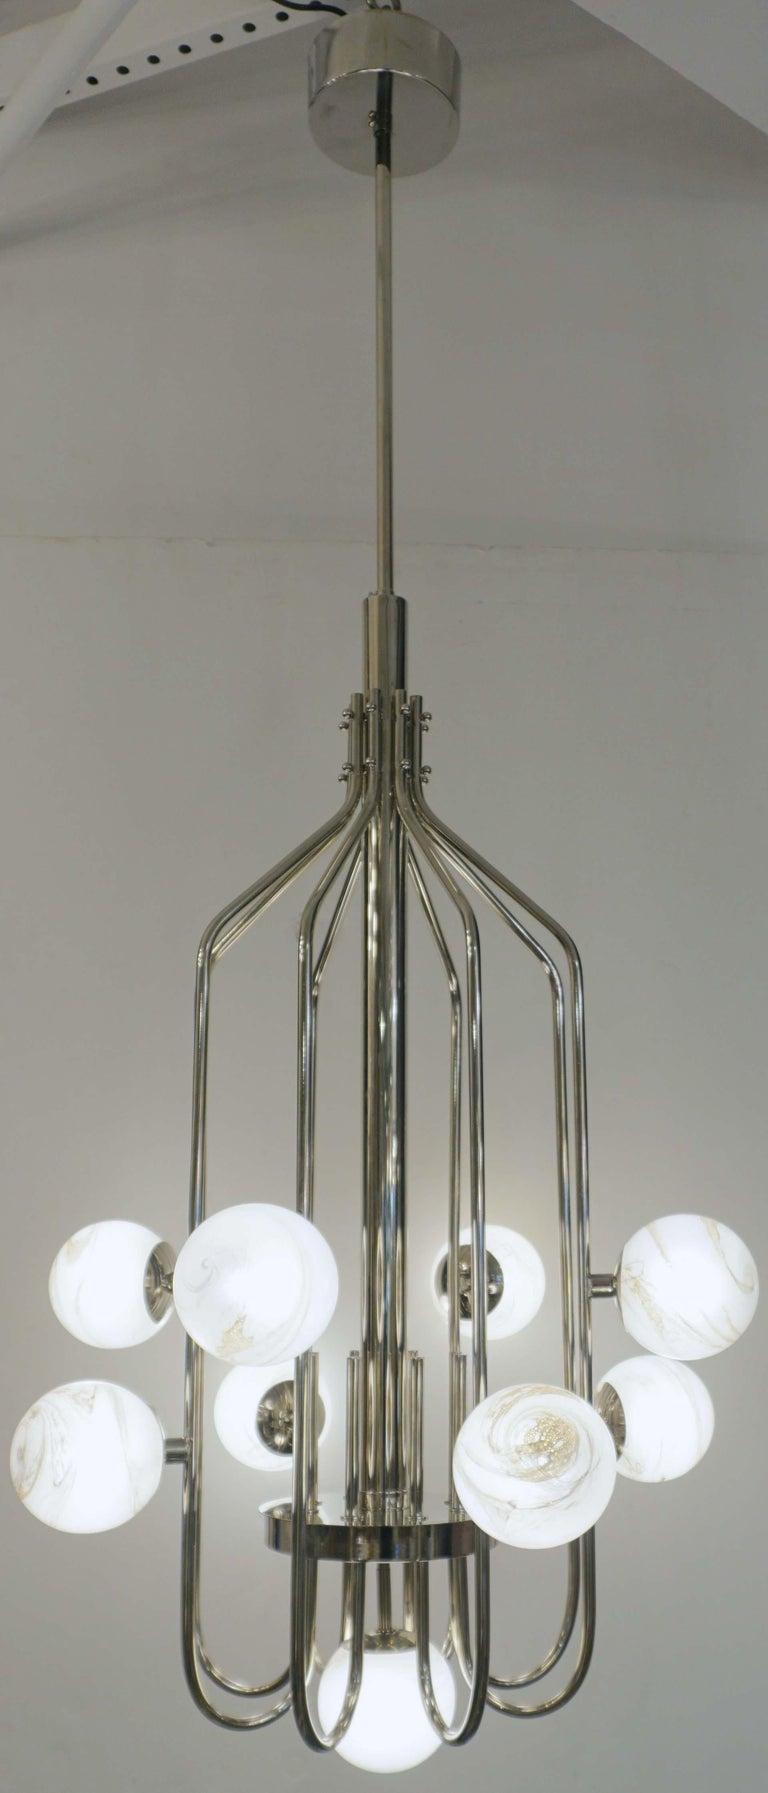 A contemporary innovative custom modern chandelier, entirely handcrafted in Italy. The handmade geometric cylinder nickel structure, resembling a sleek birdcage, has a very organic curvilinear shape decorated with 9 round globes in an innovative